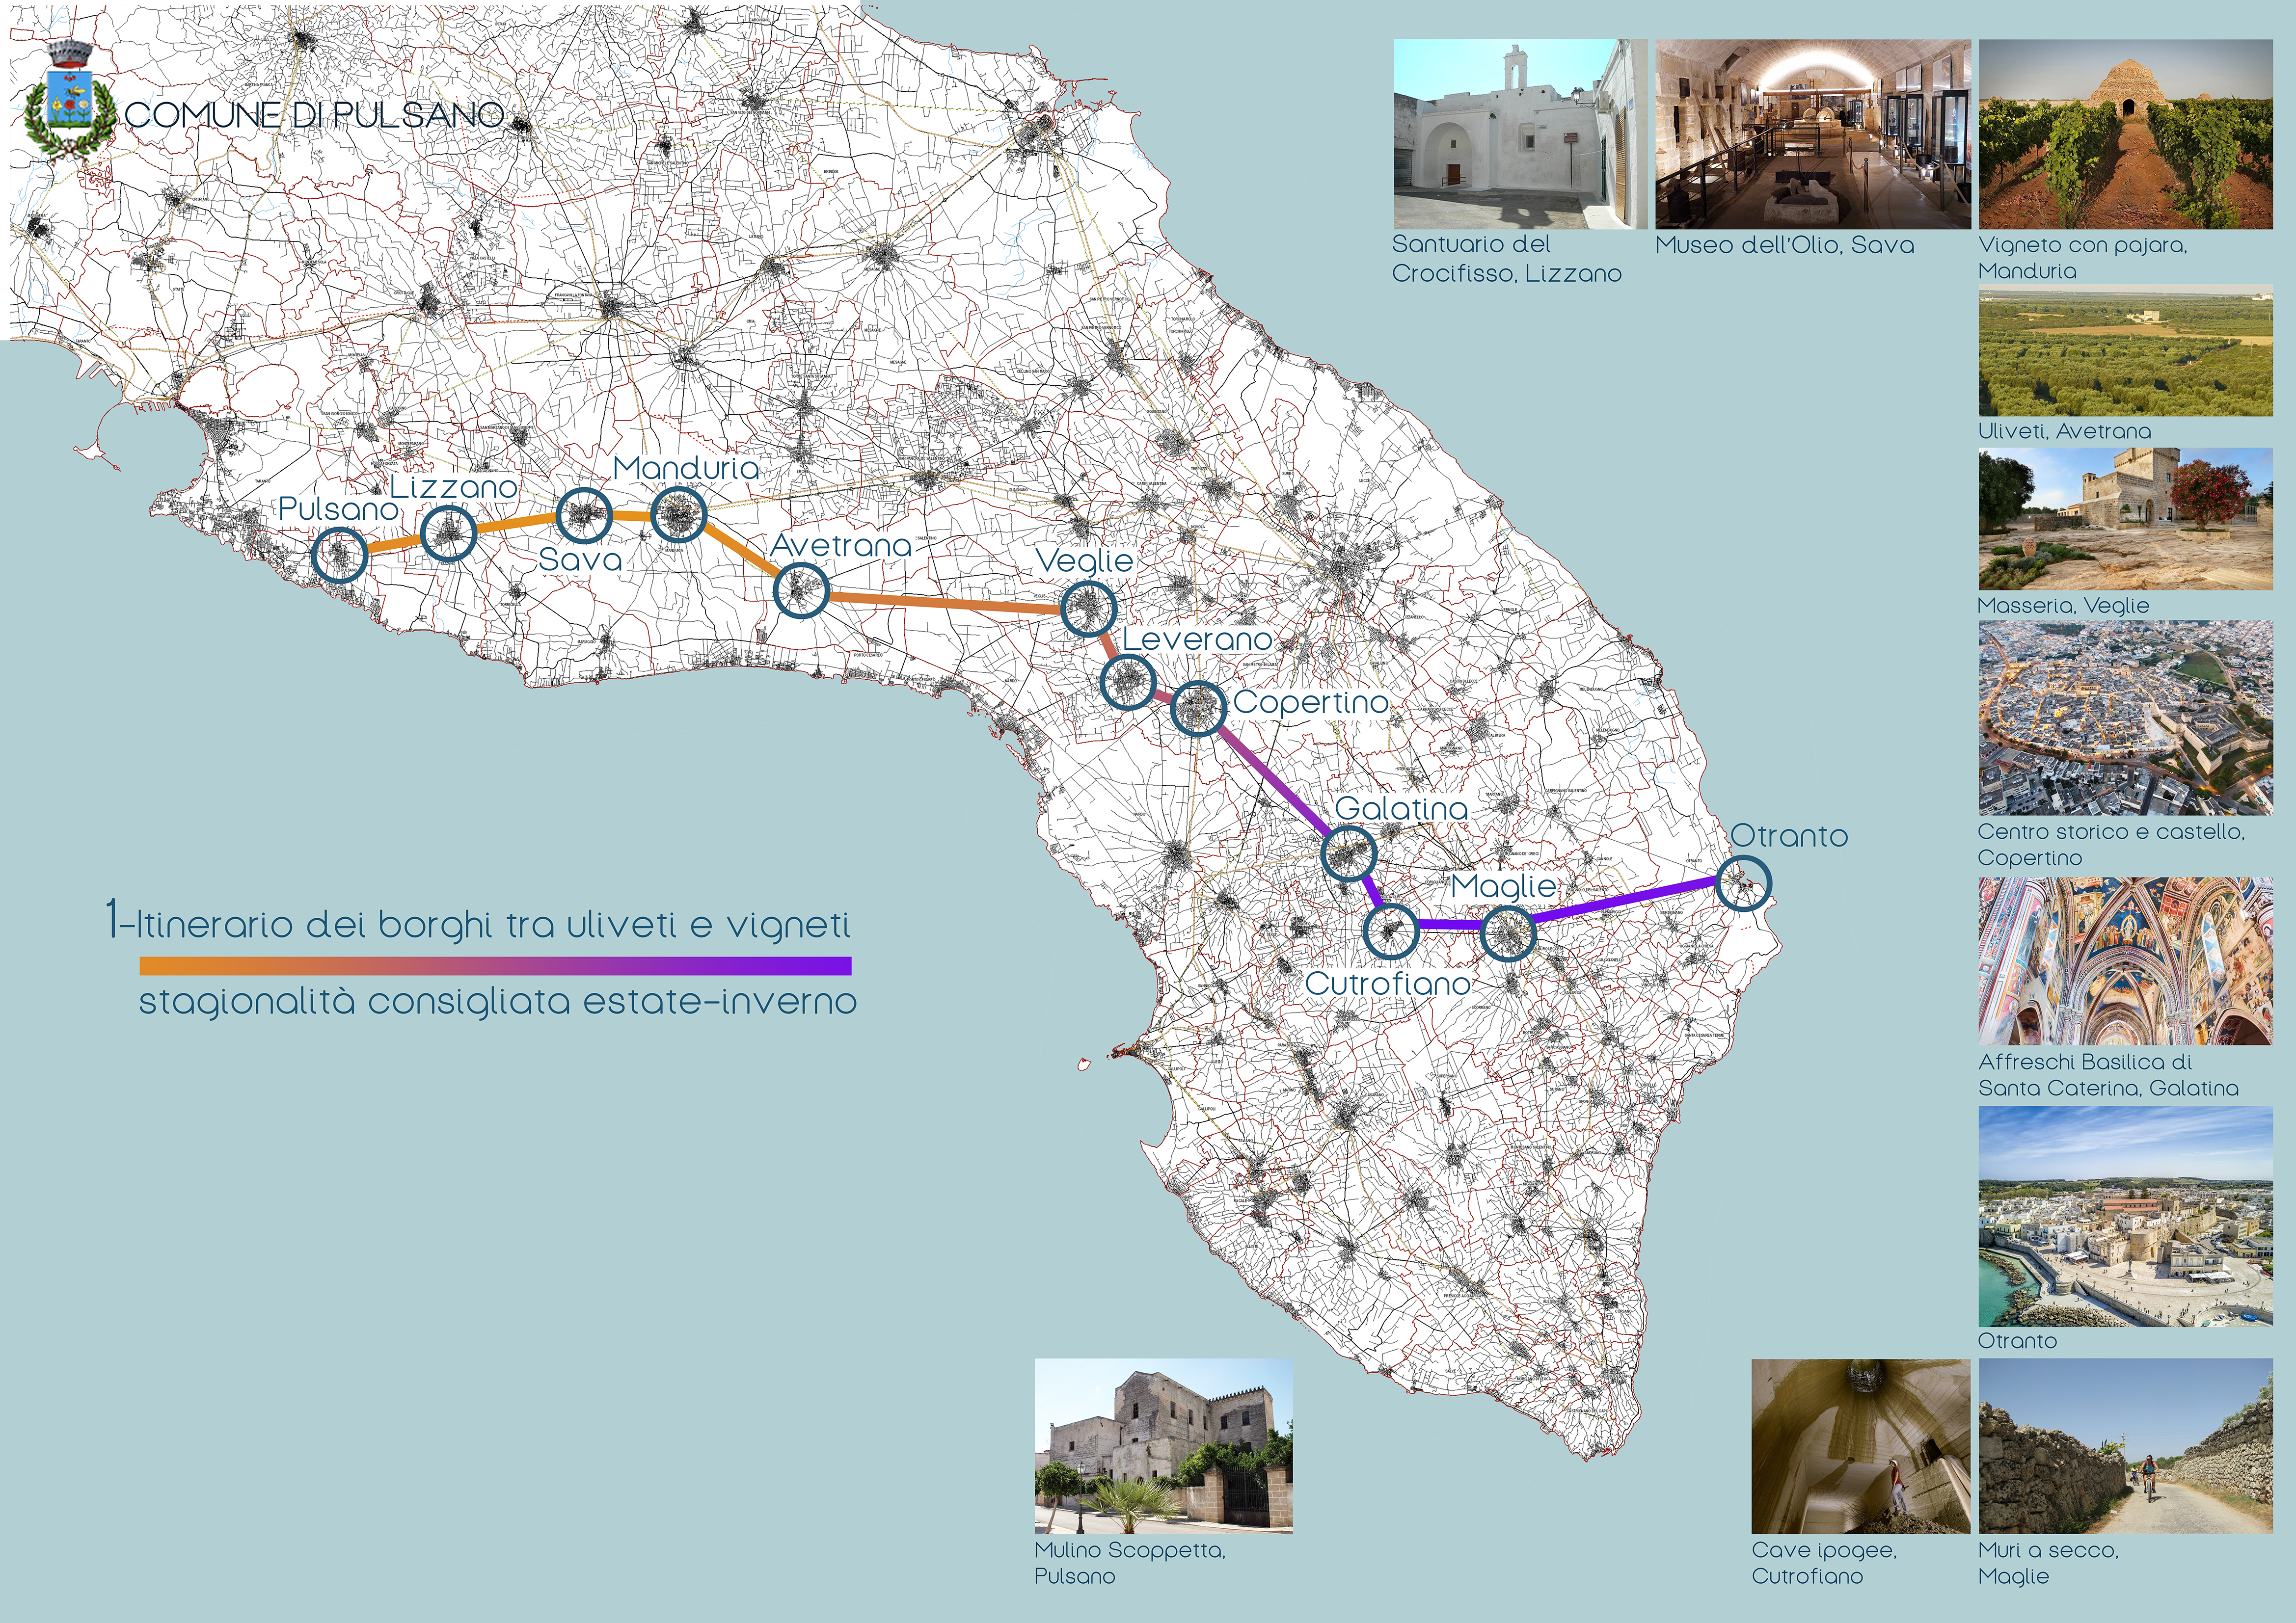 ITINERARY OF THE VILLAGES AMONG OLIVE GROVES AND VINEYARDS